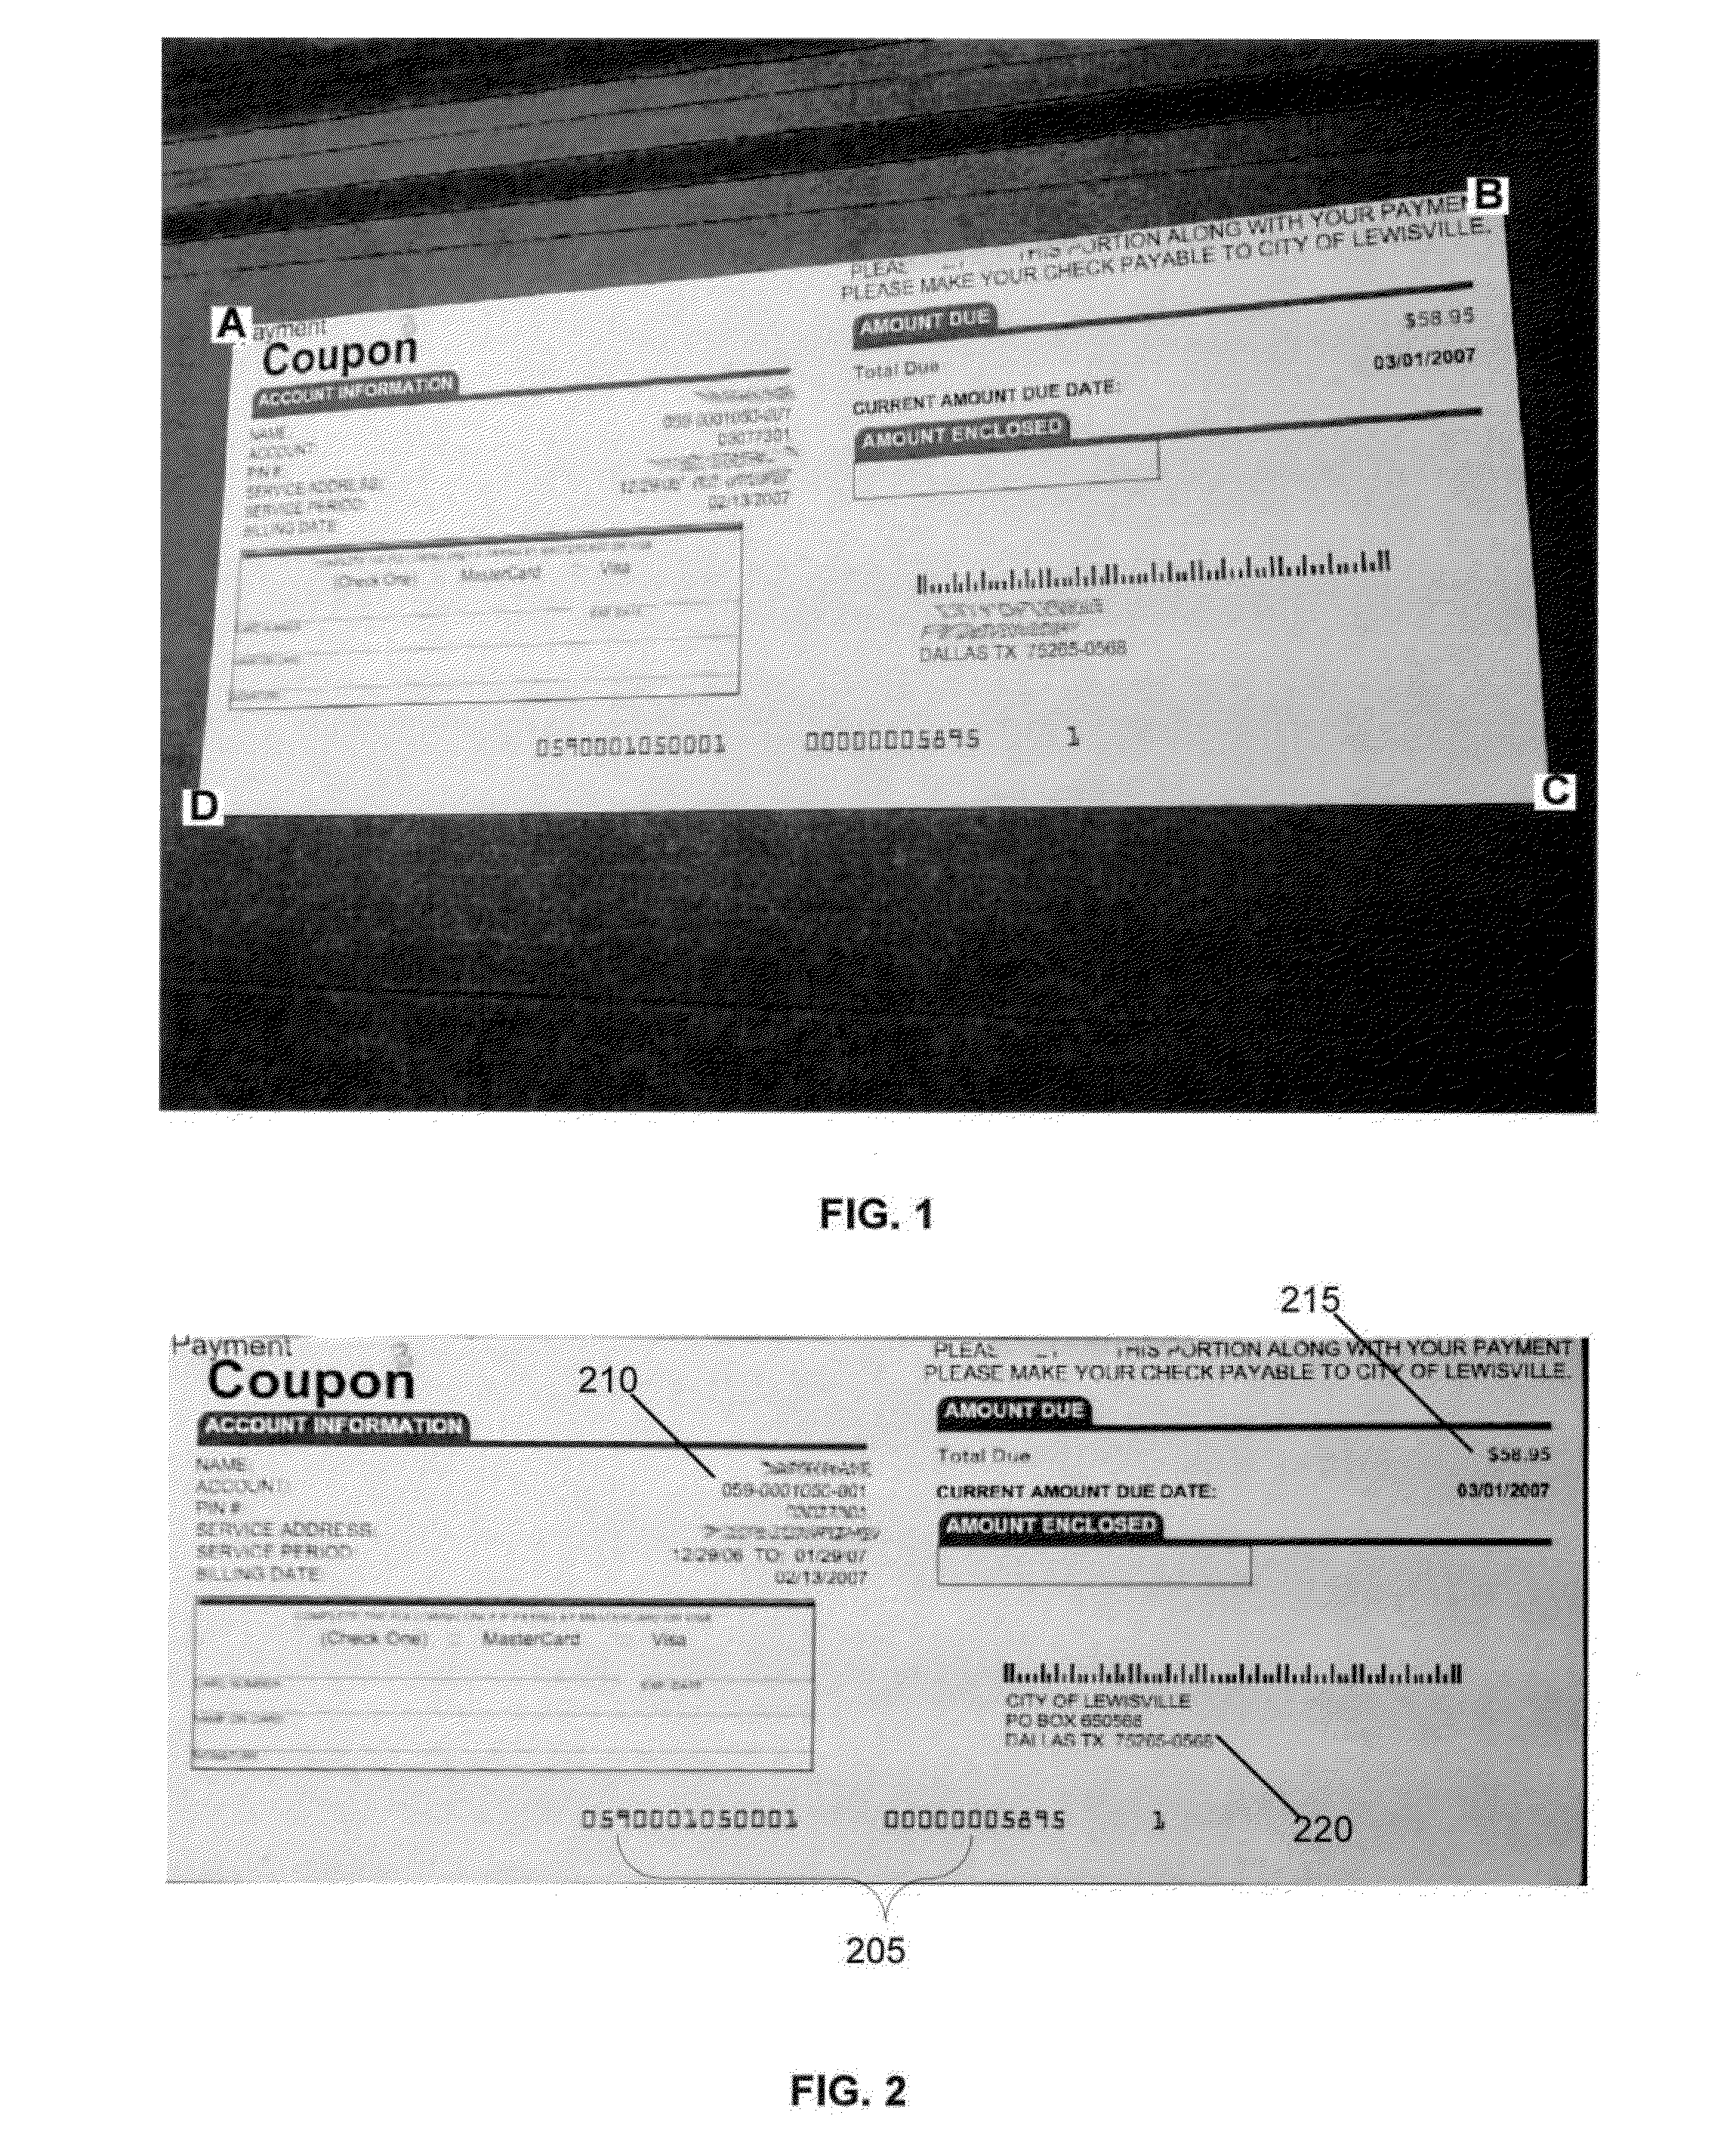 Systems and methods for obtaining financial offers using mobile image capture